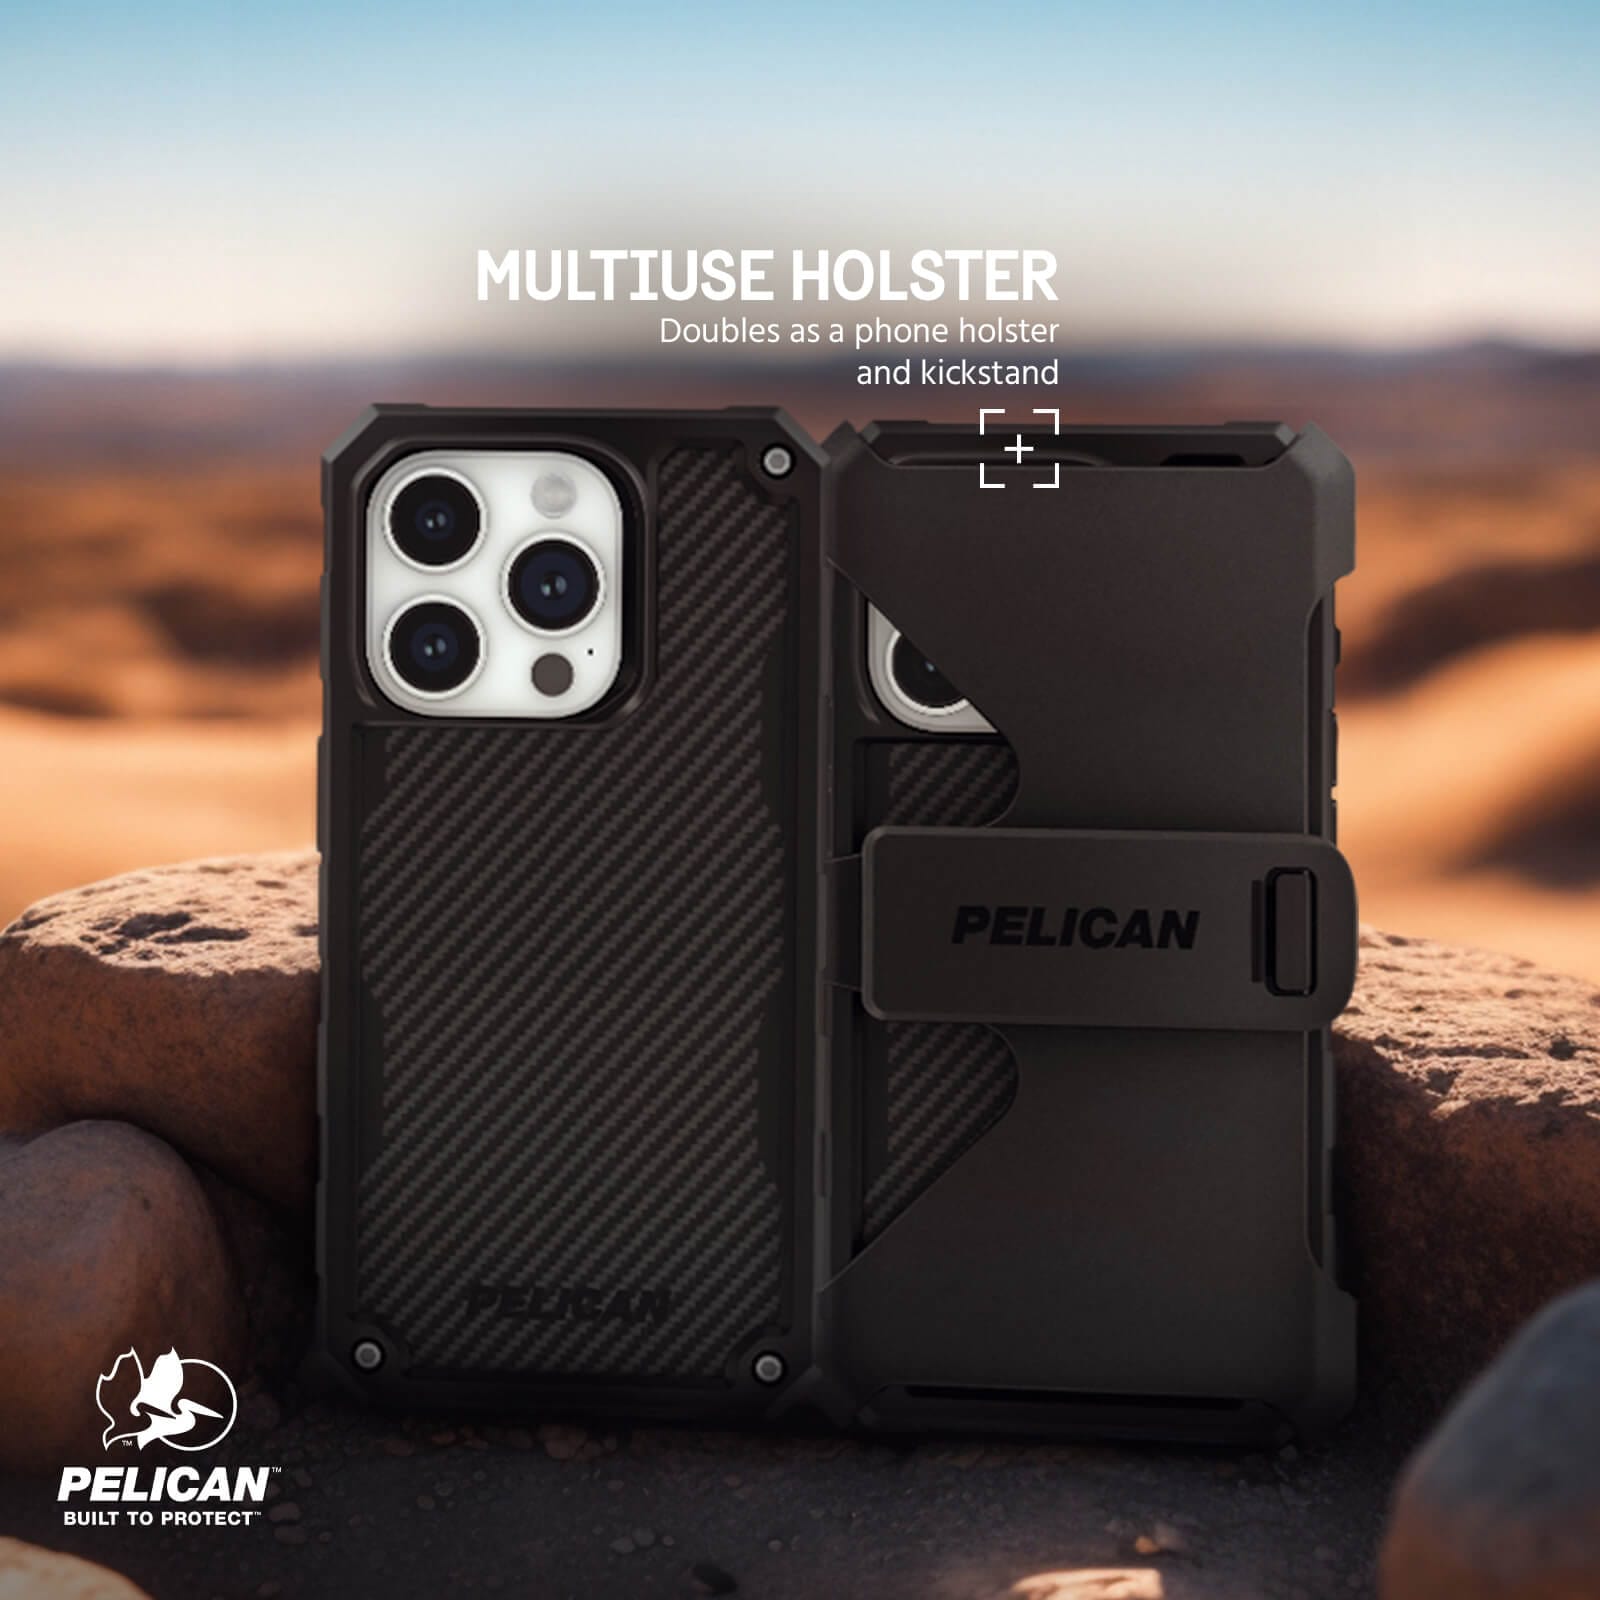 MULTI USE HOLSTER. DOUBLES AS A PHONE HOLSTER AND KICKSTAND